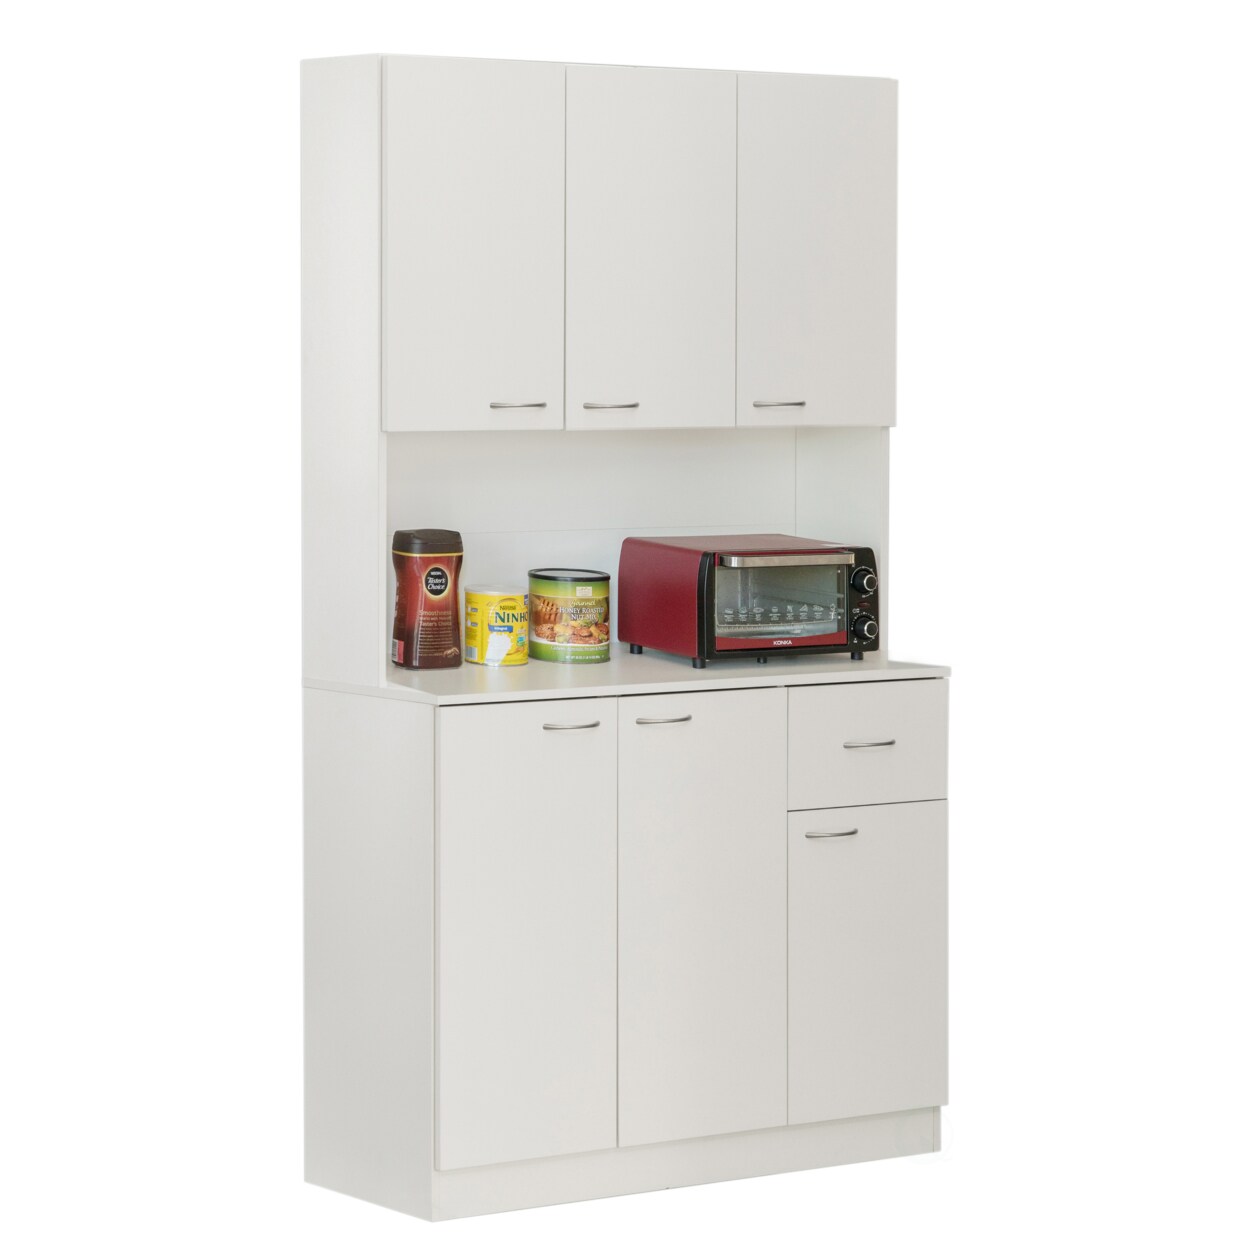 Basicwise Kitchen Pantry Storage Cabinet with Doors and Shelves White